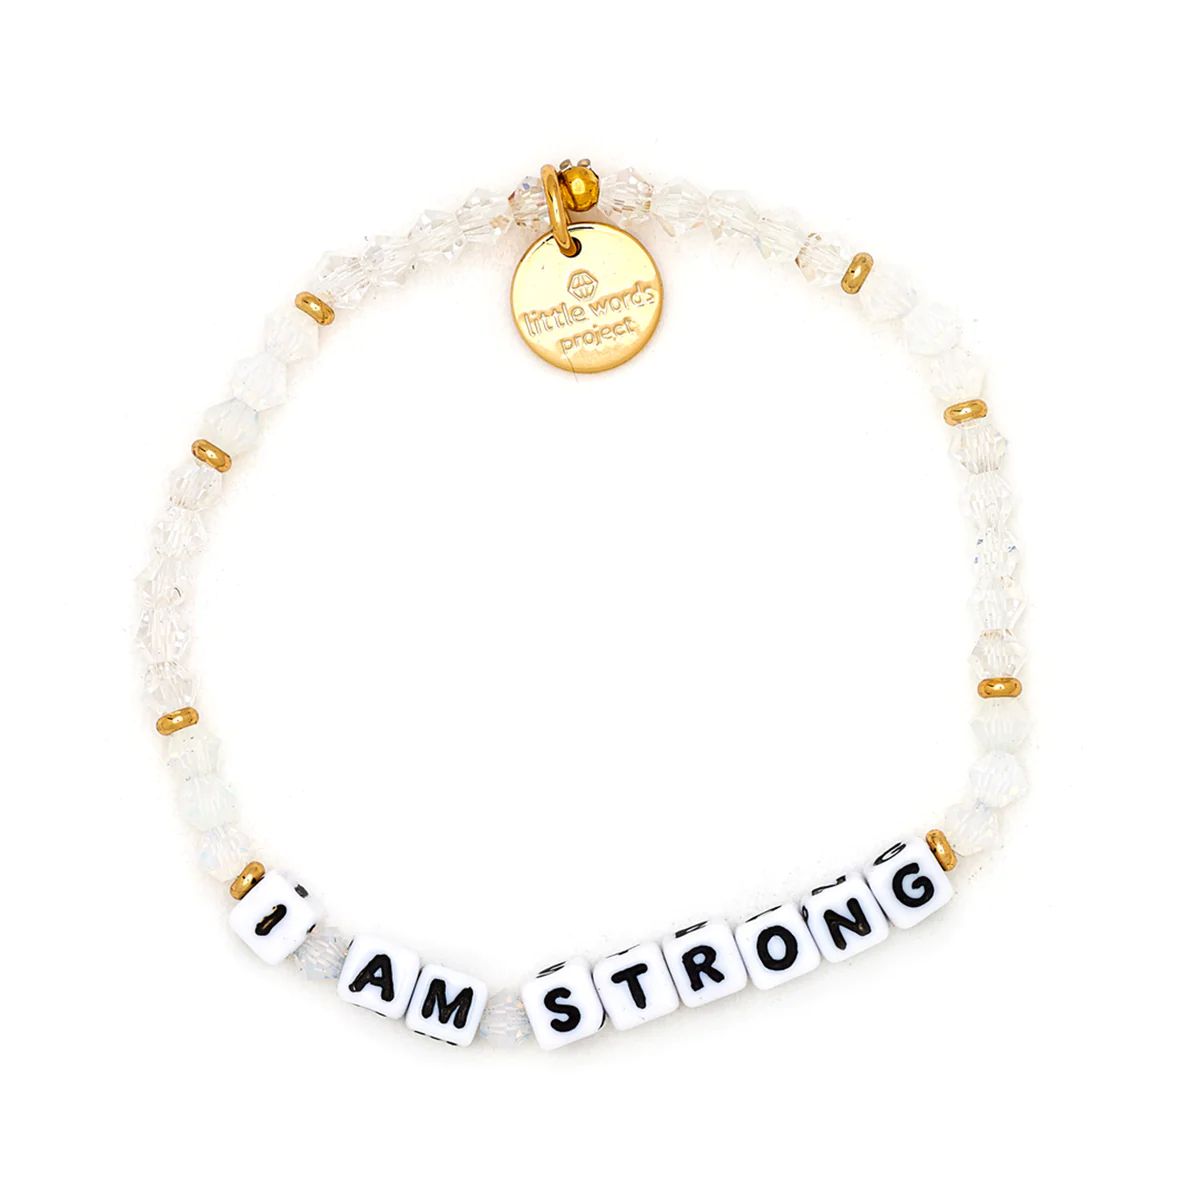 Laurie Hernandez x LWP- I Am Strong 
            
            
            
           
         ... | Little Words Project